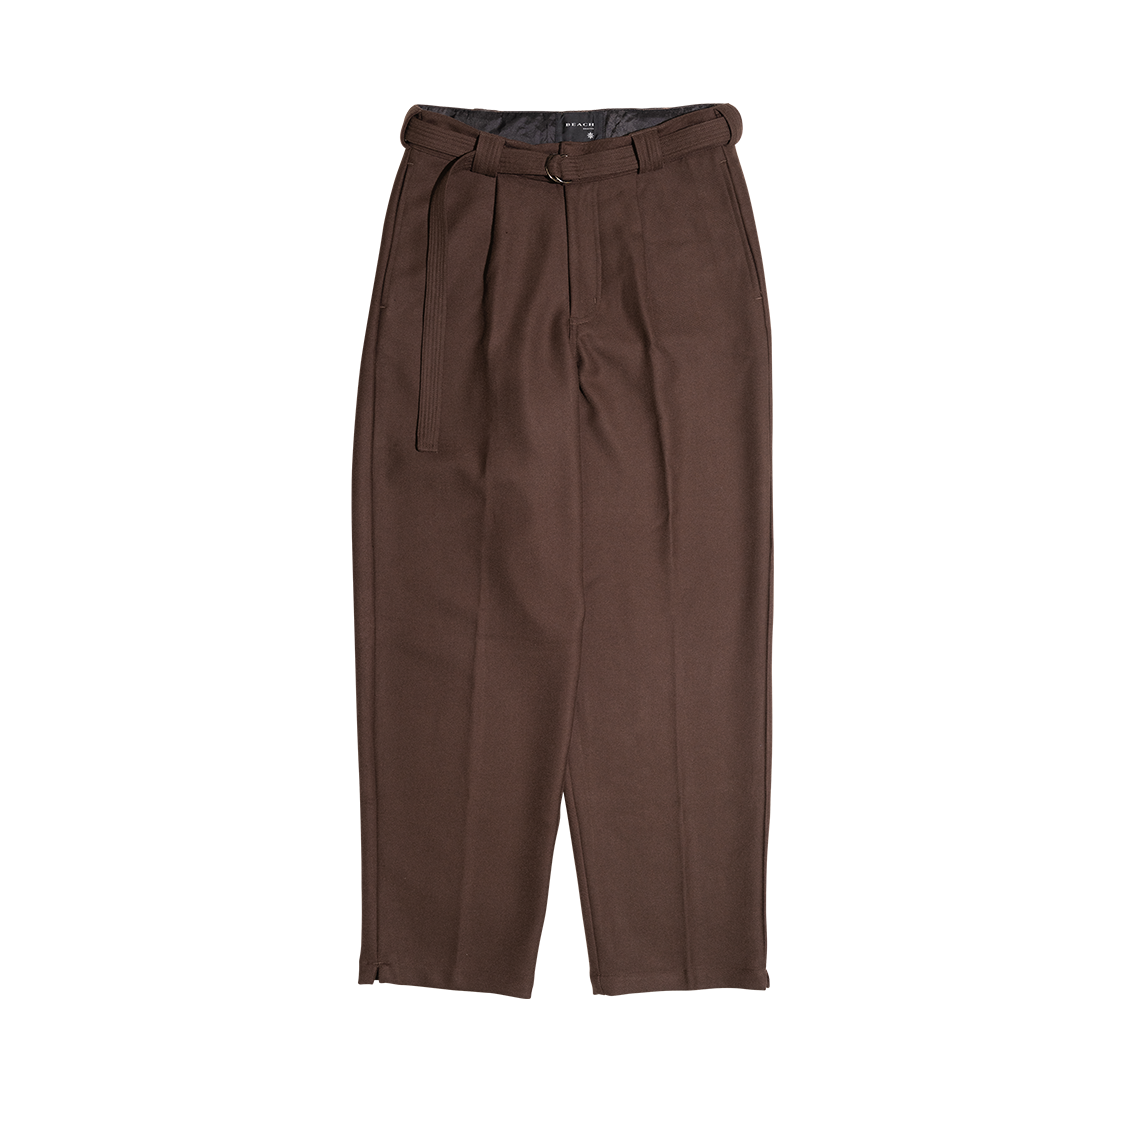 PLEATED SUIT PANT, BROWN